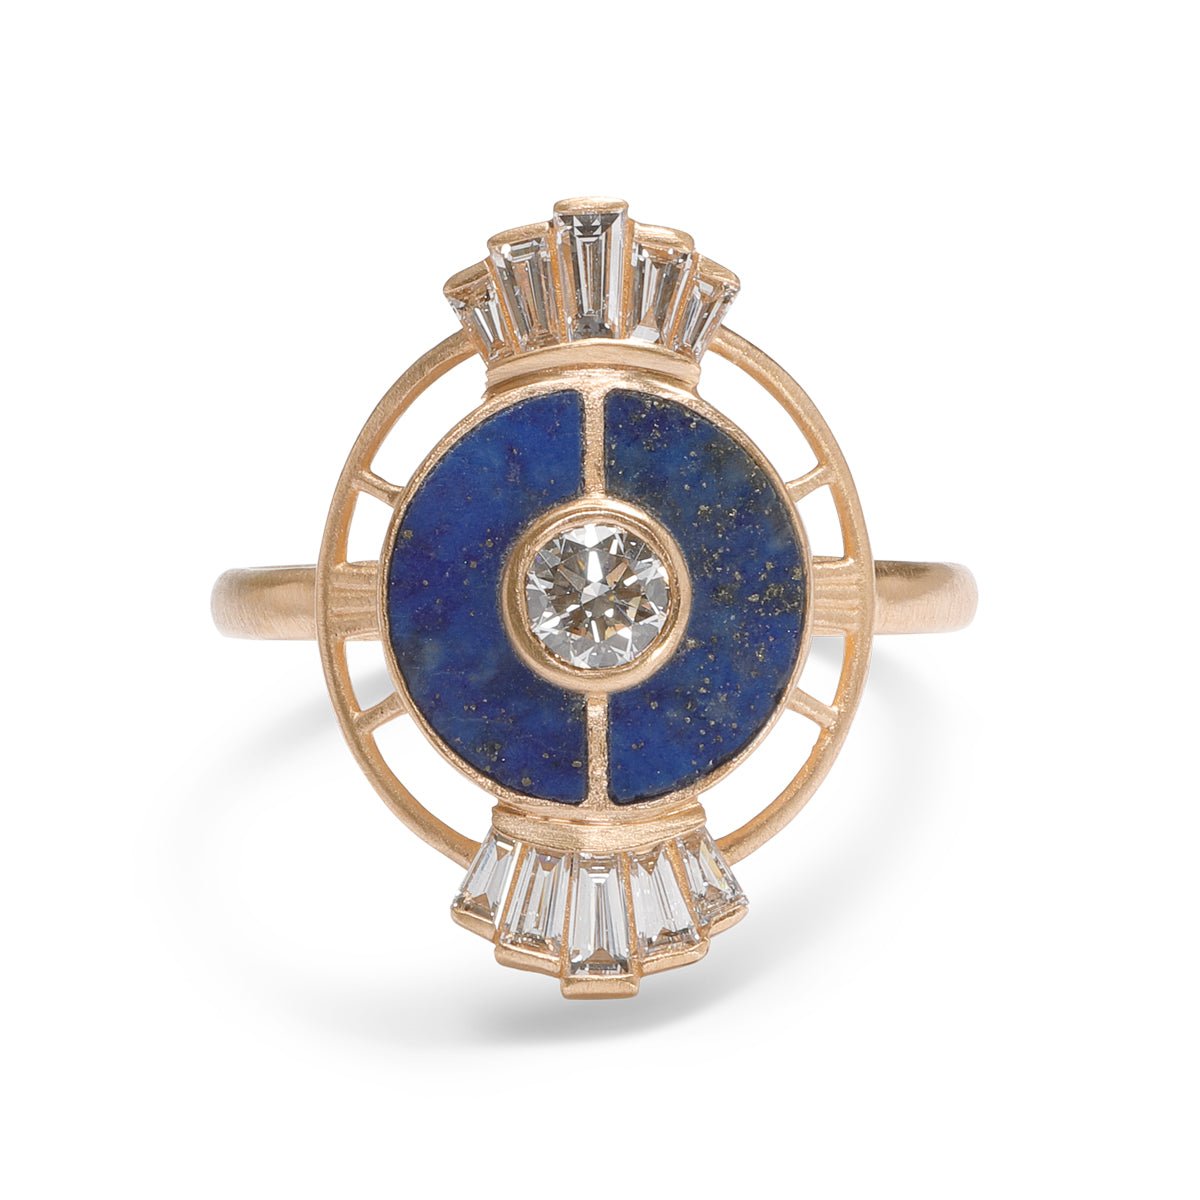 Ara 14K recycled gold ring, with lab-grown diamonds and chilean lapis inlay. Designed and handcrafted in Portland, Oregon.